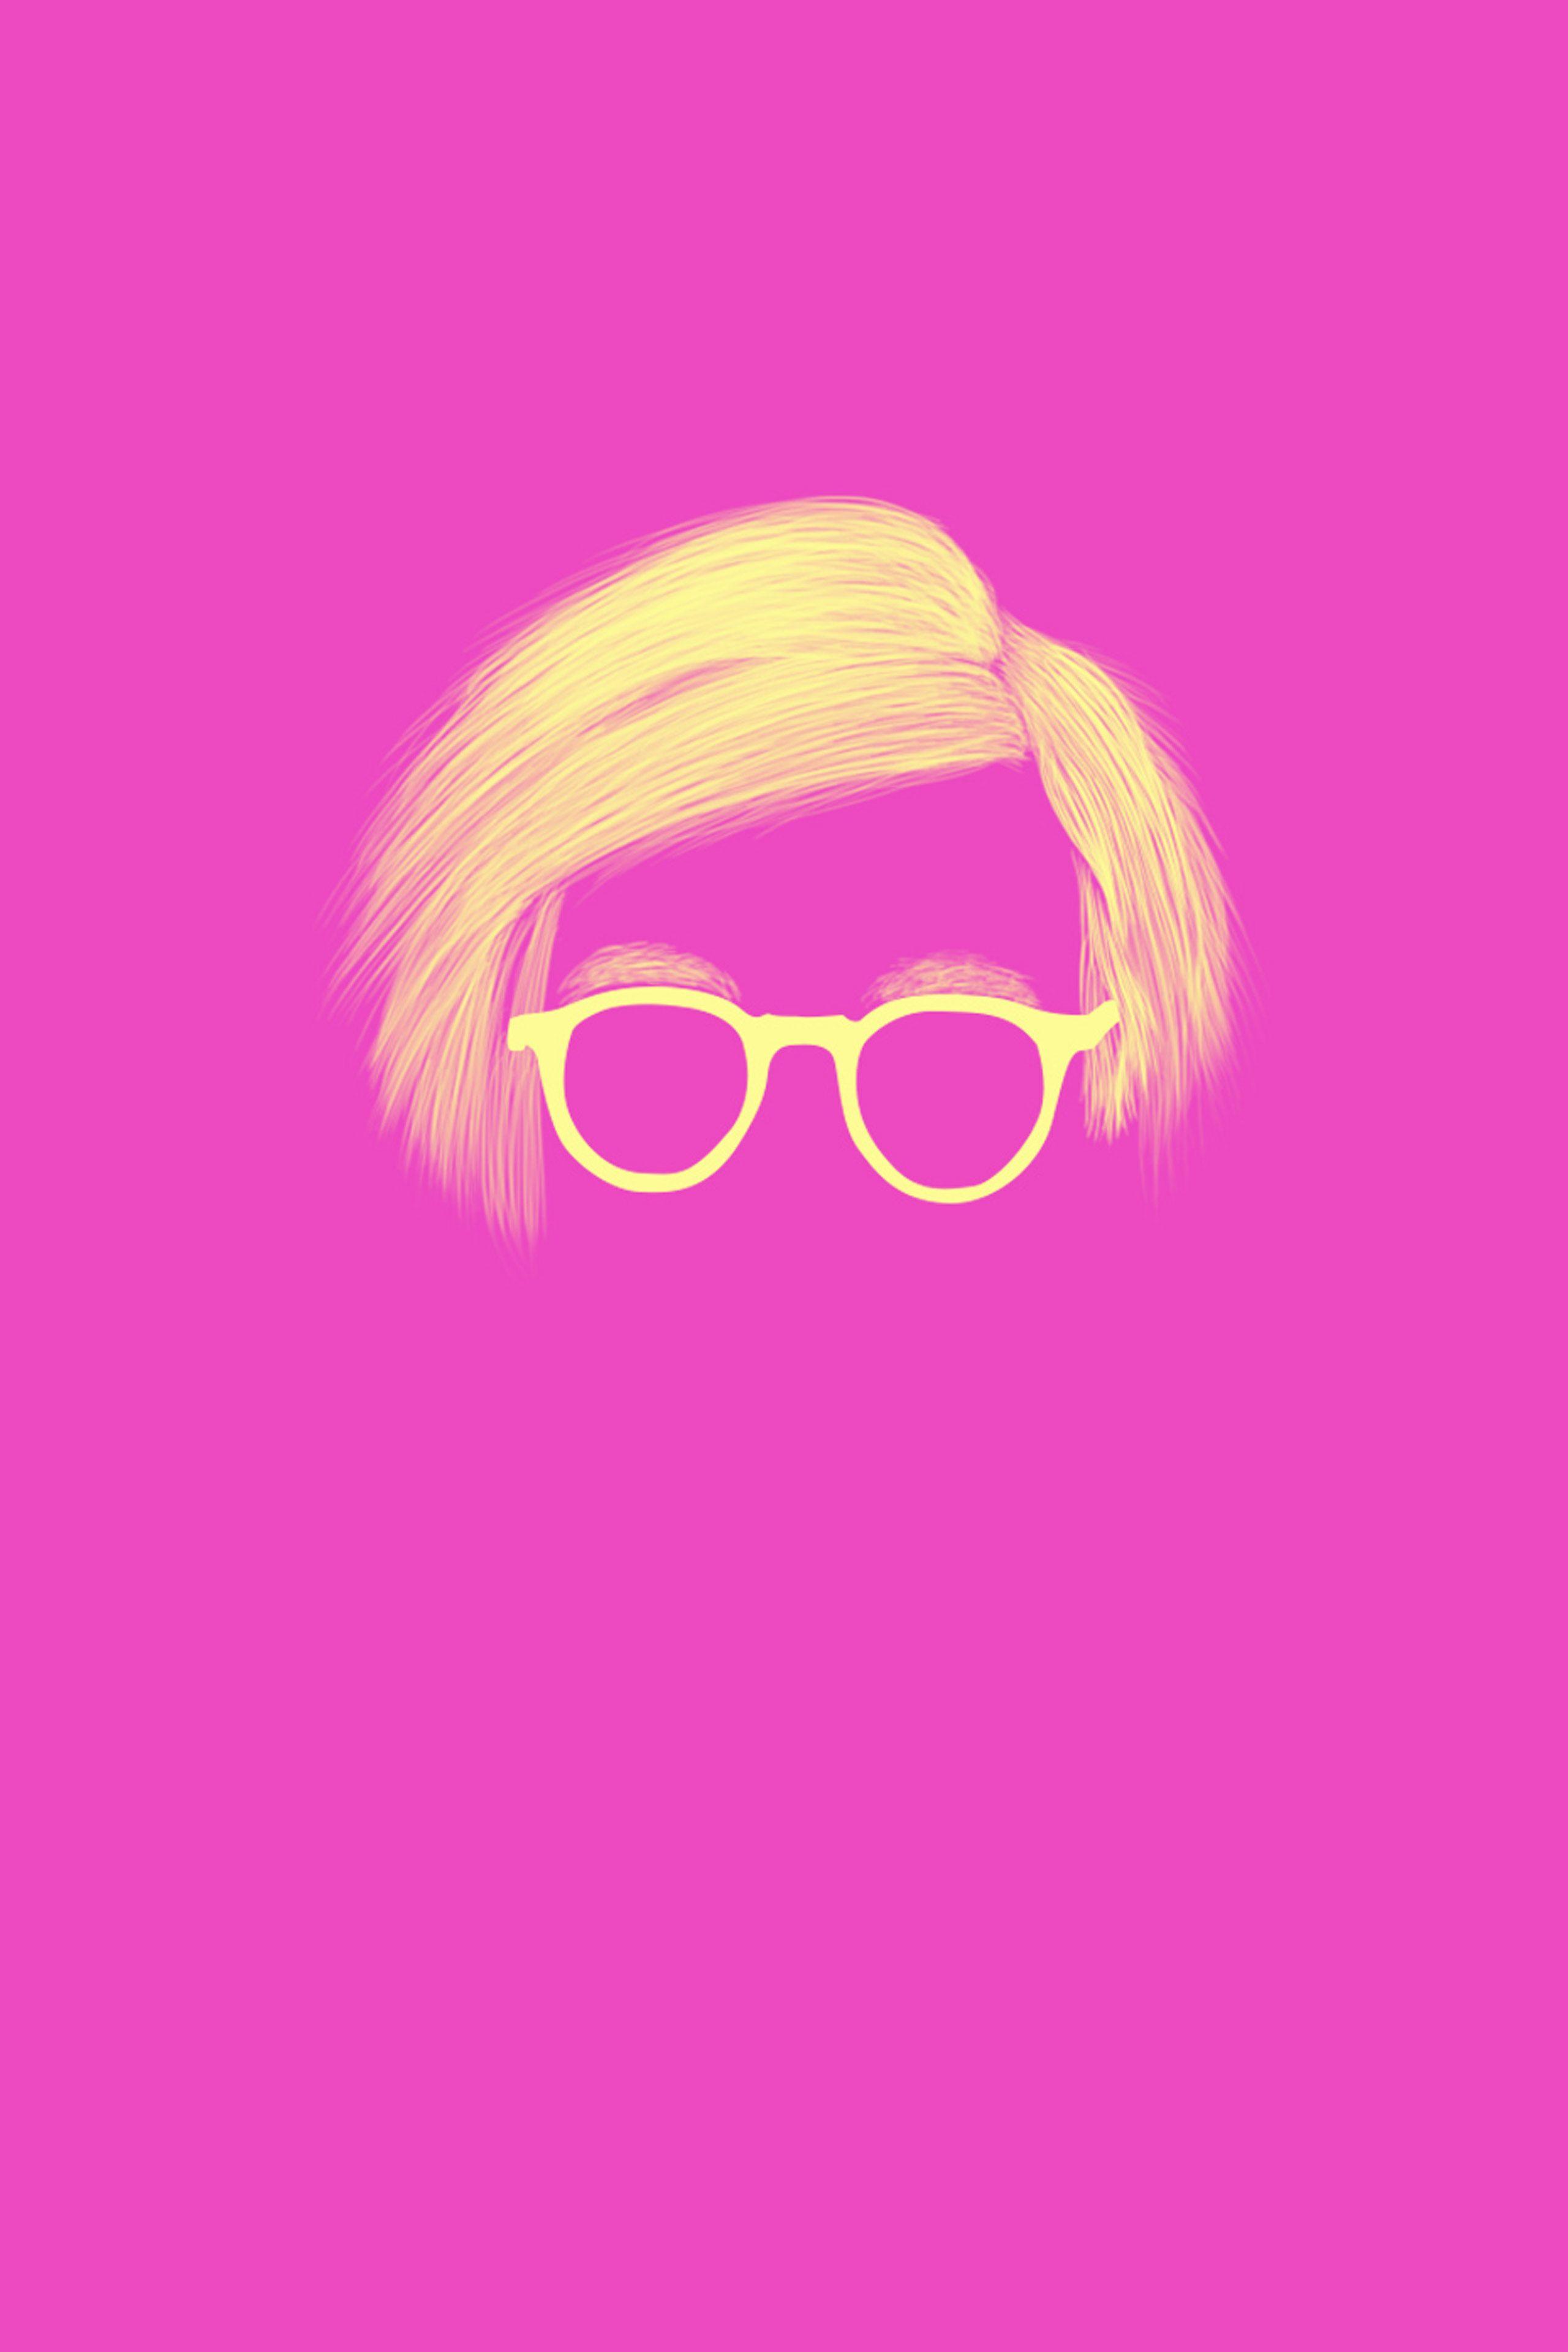 Andy Warhol Iphone Wallpapers Top Free Andy Warhol Iphone